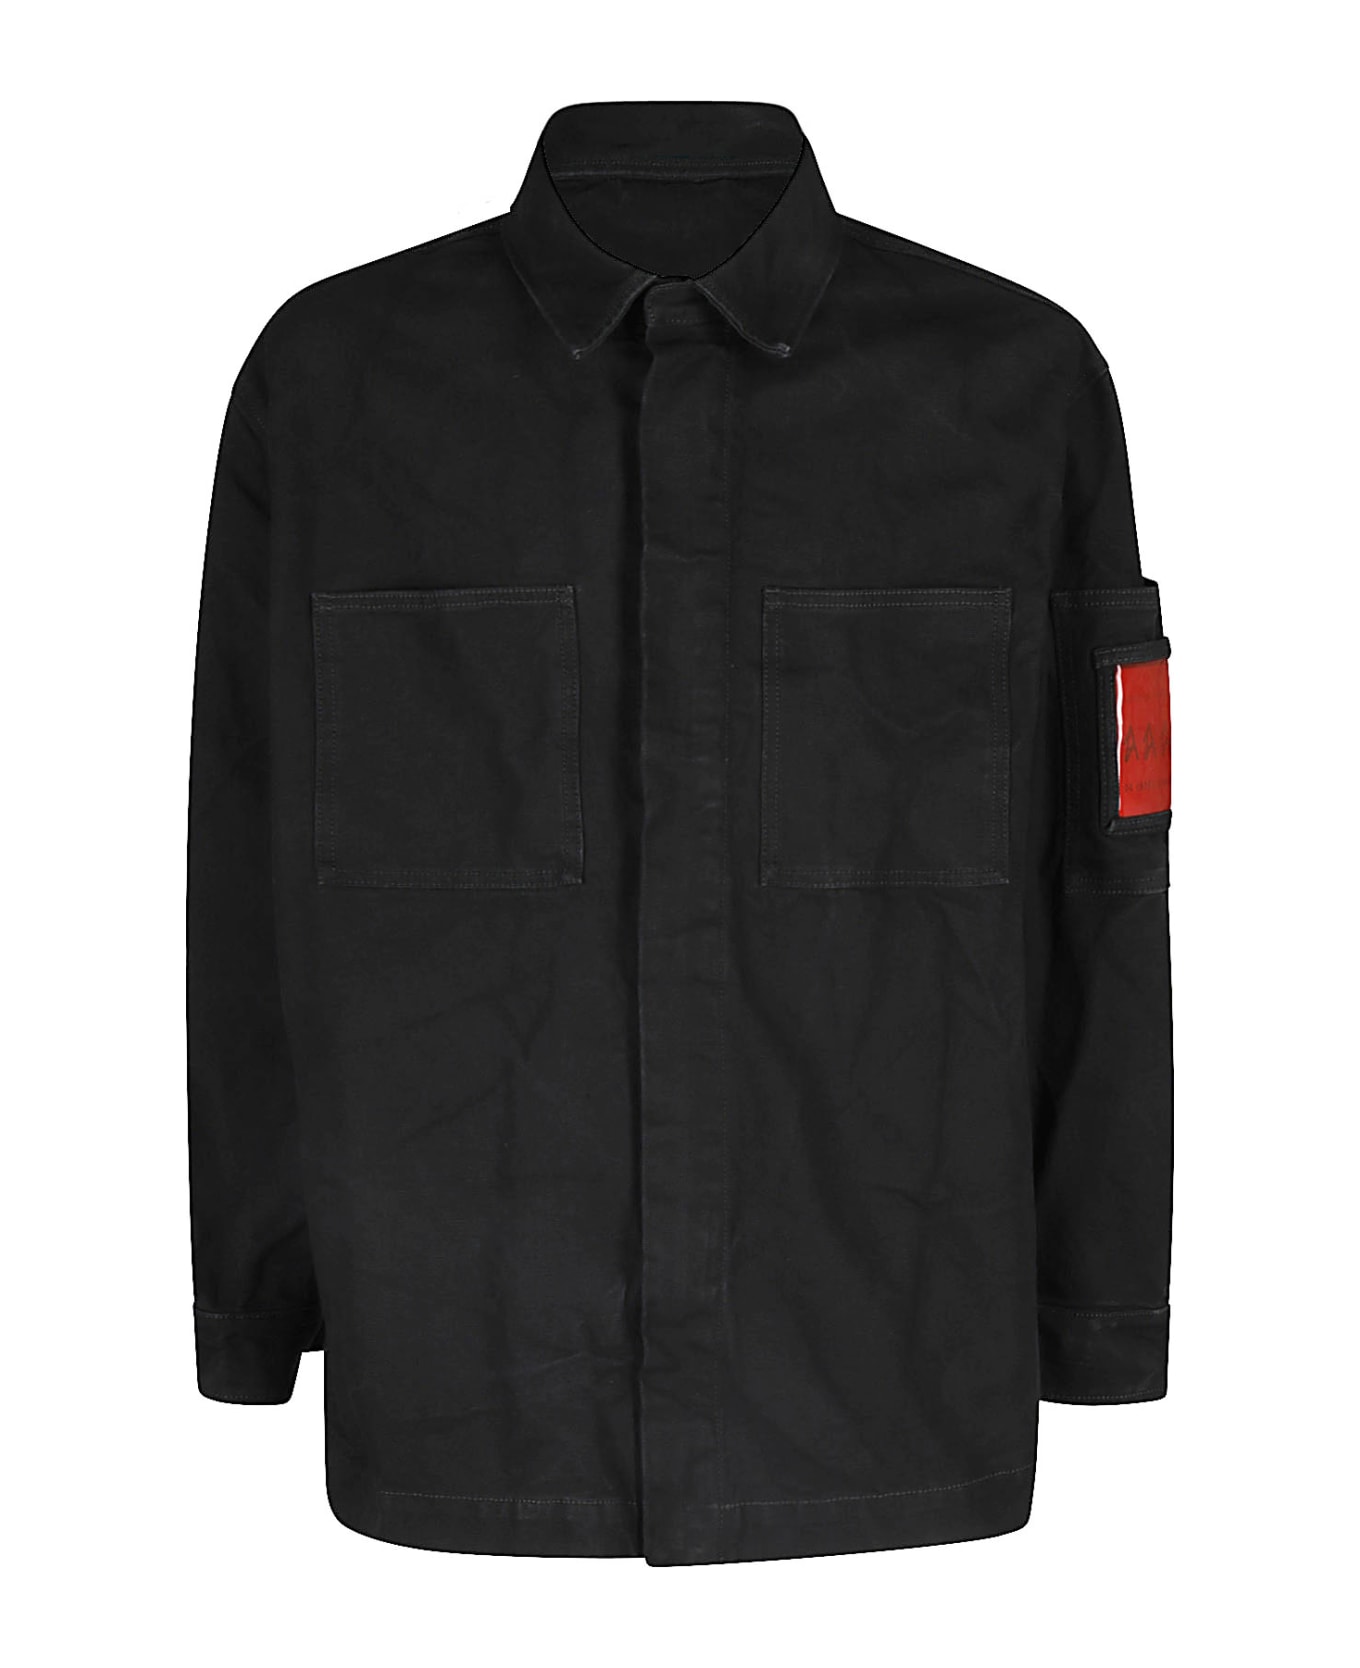 44 Label Group Hangover Overshirt Canvas